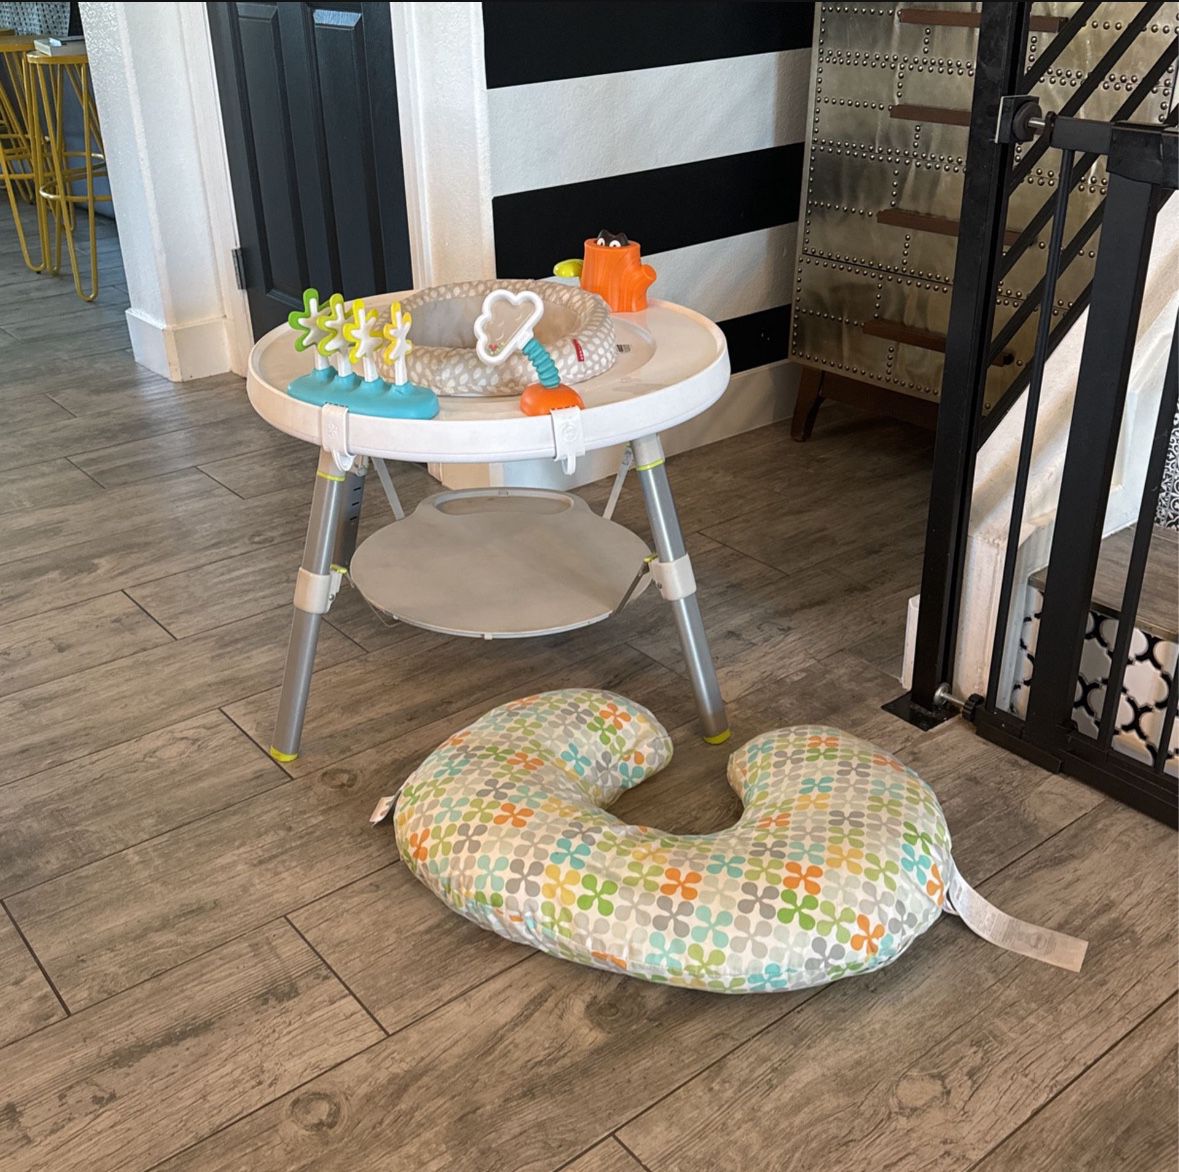 Baby Activity Center - Baby Items - Baby Gear 